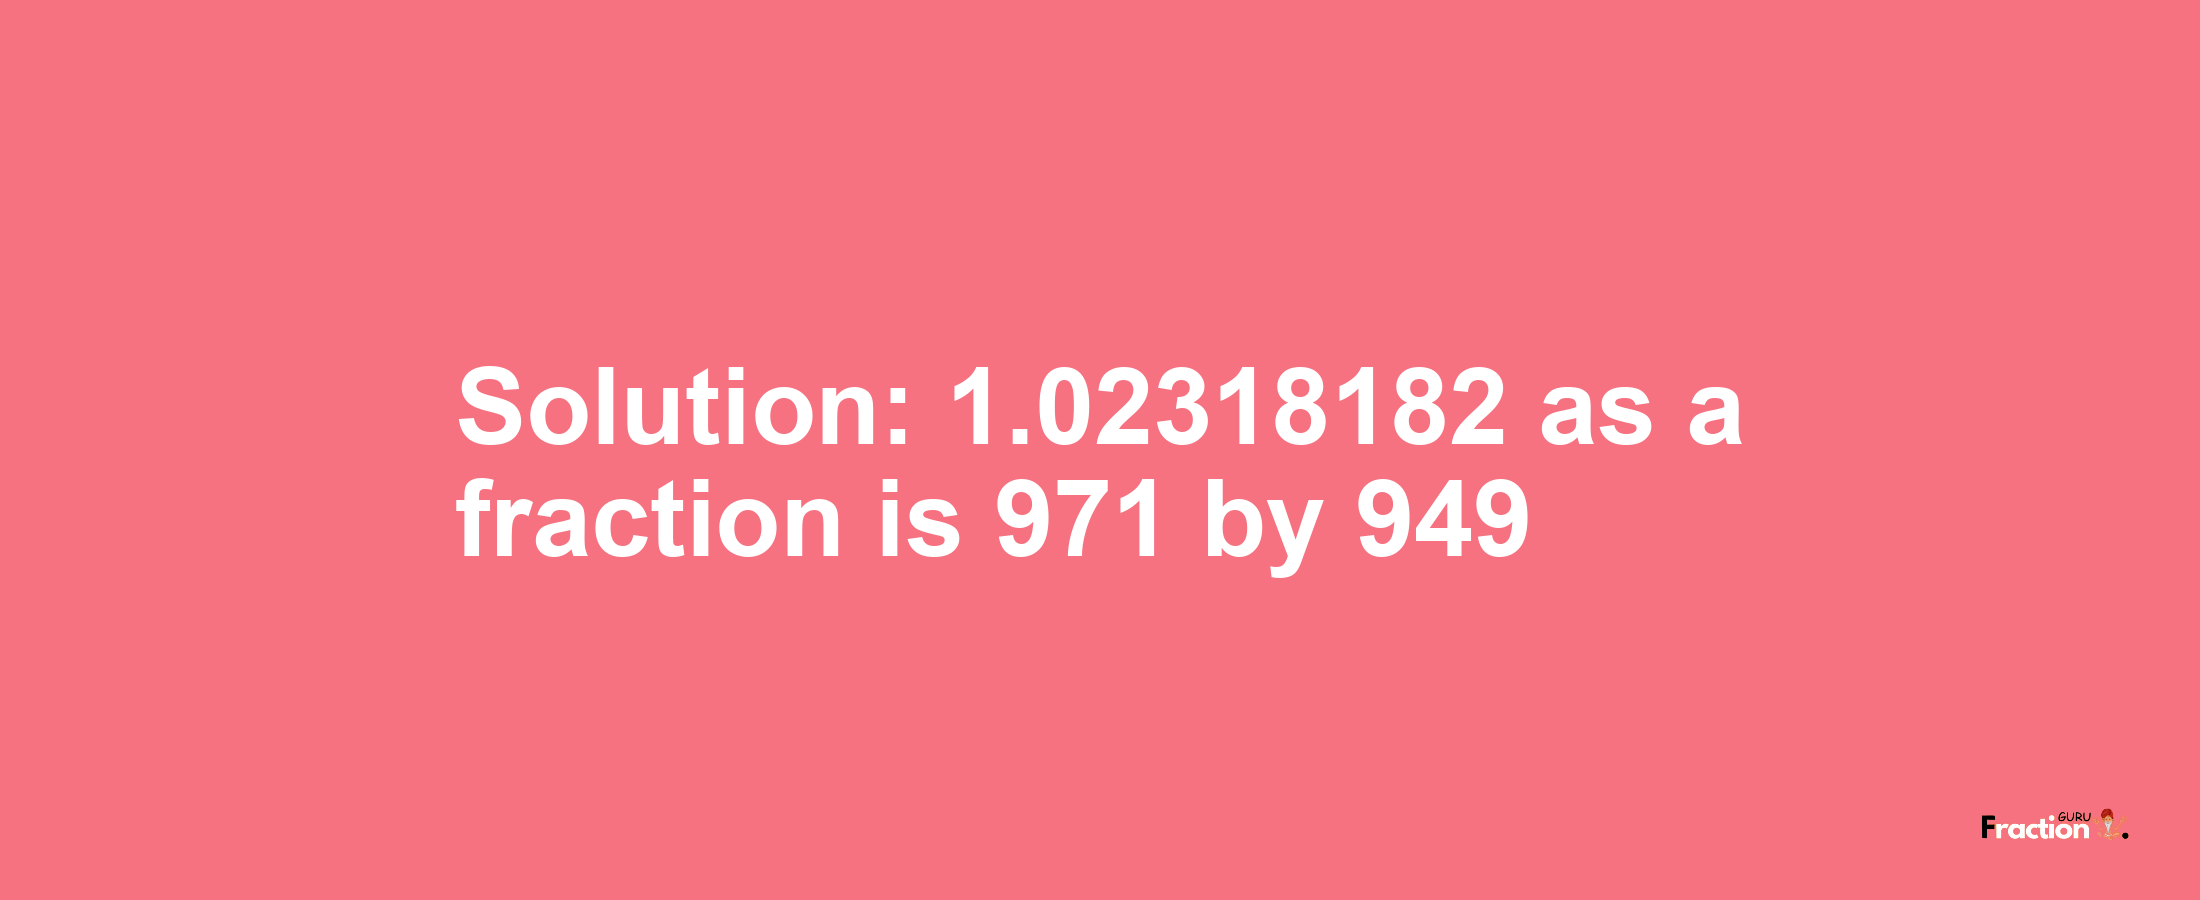 Solution:1.02318182 as a fraction is 971/949